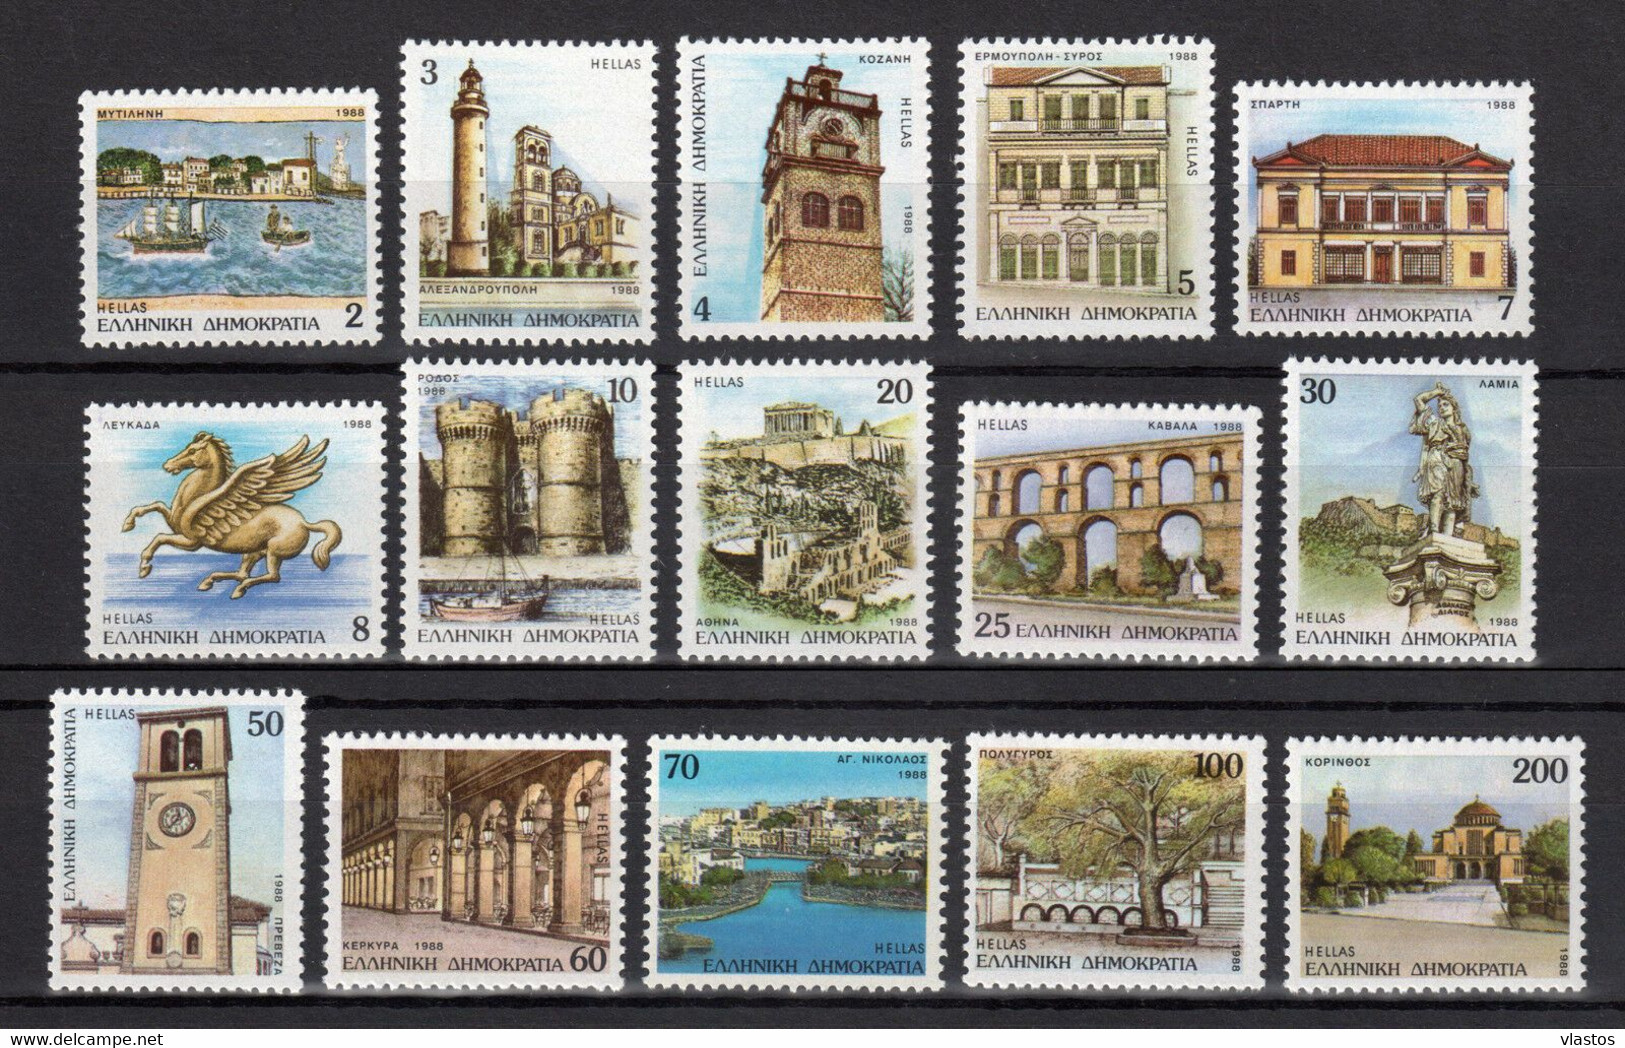 GREECE 1988 COMPLETE YEAR - PERFORATED STAMPS MNH